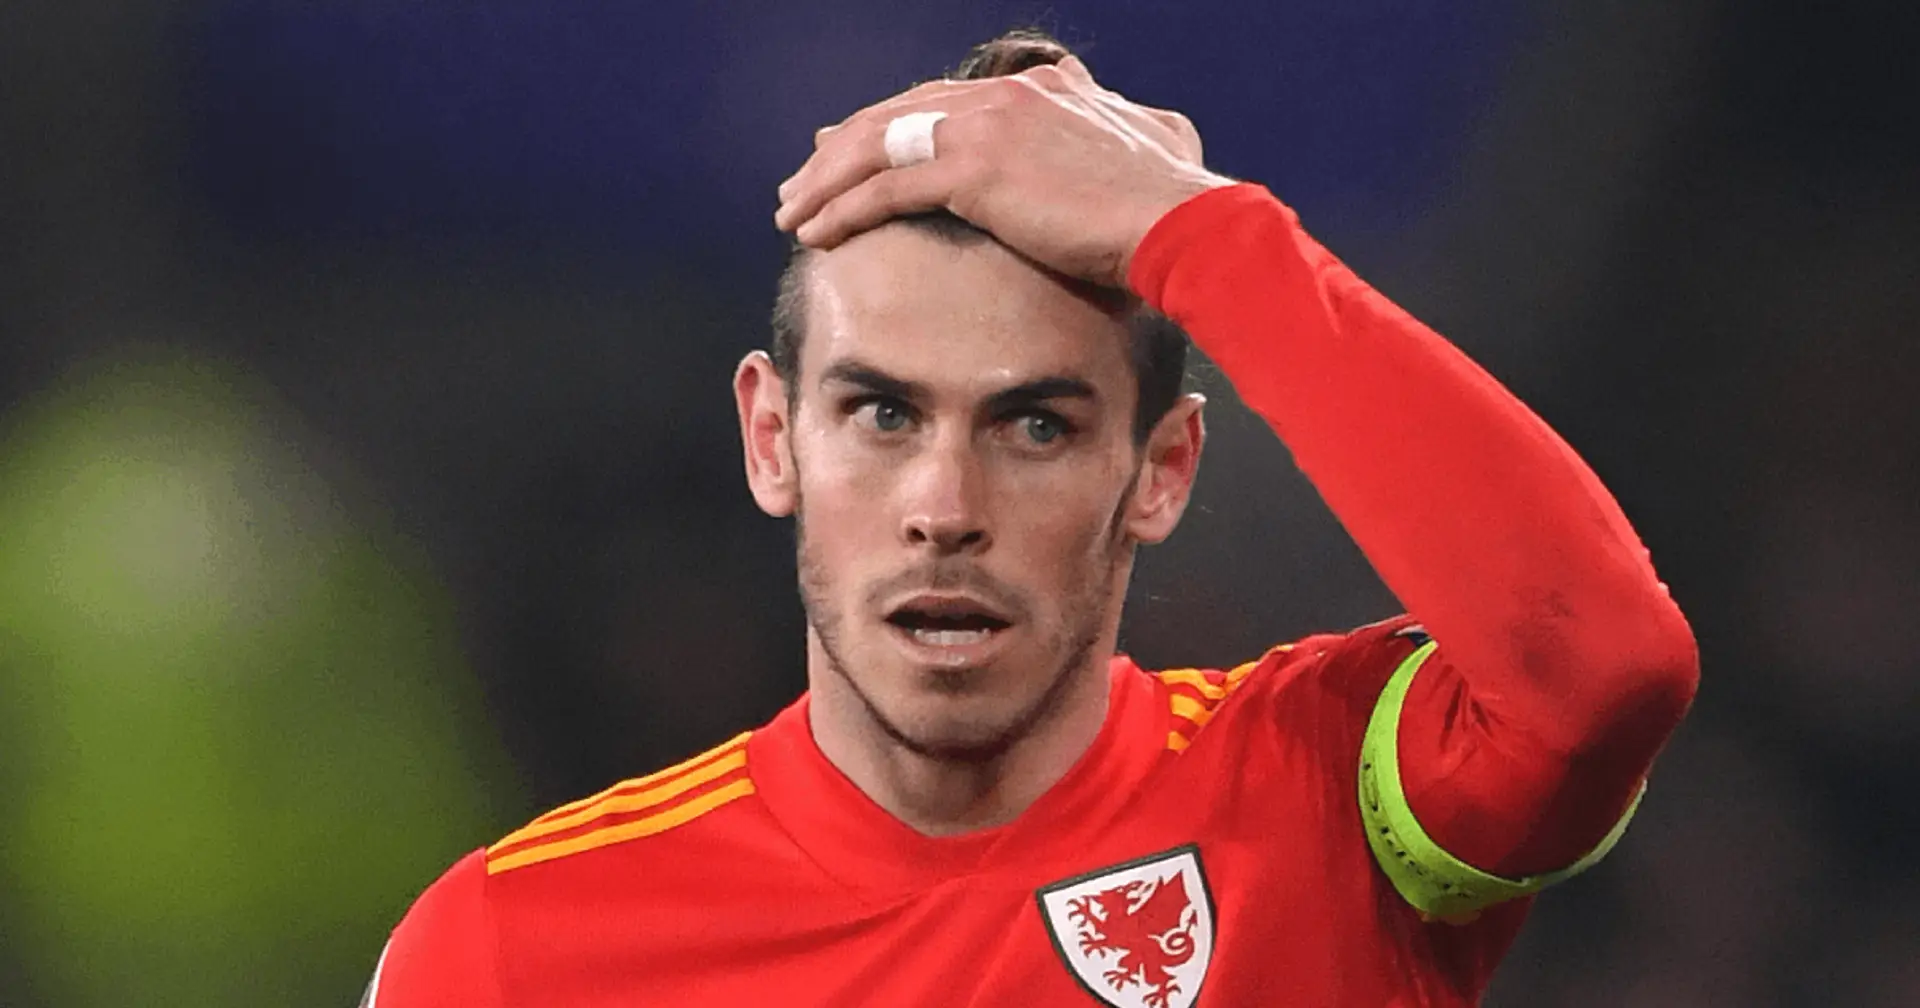 'Something needs to happen': Gareth Bale urges to boycott social media to tackle online abuse